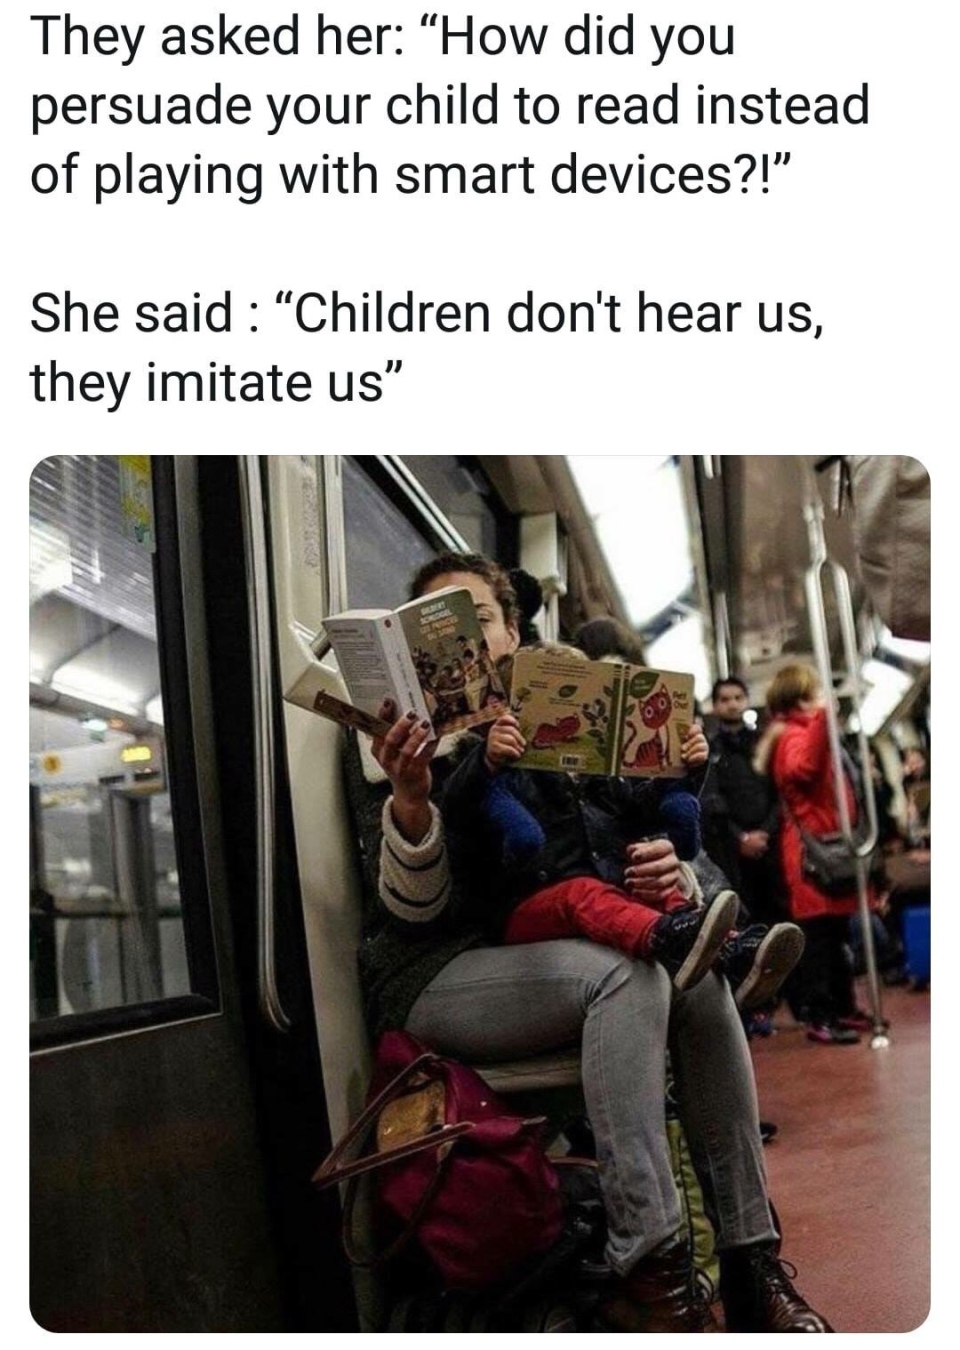 Children don't hear us. They imitate us.